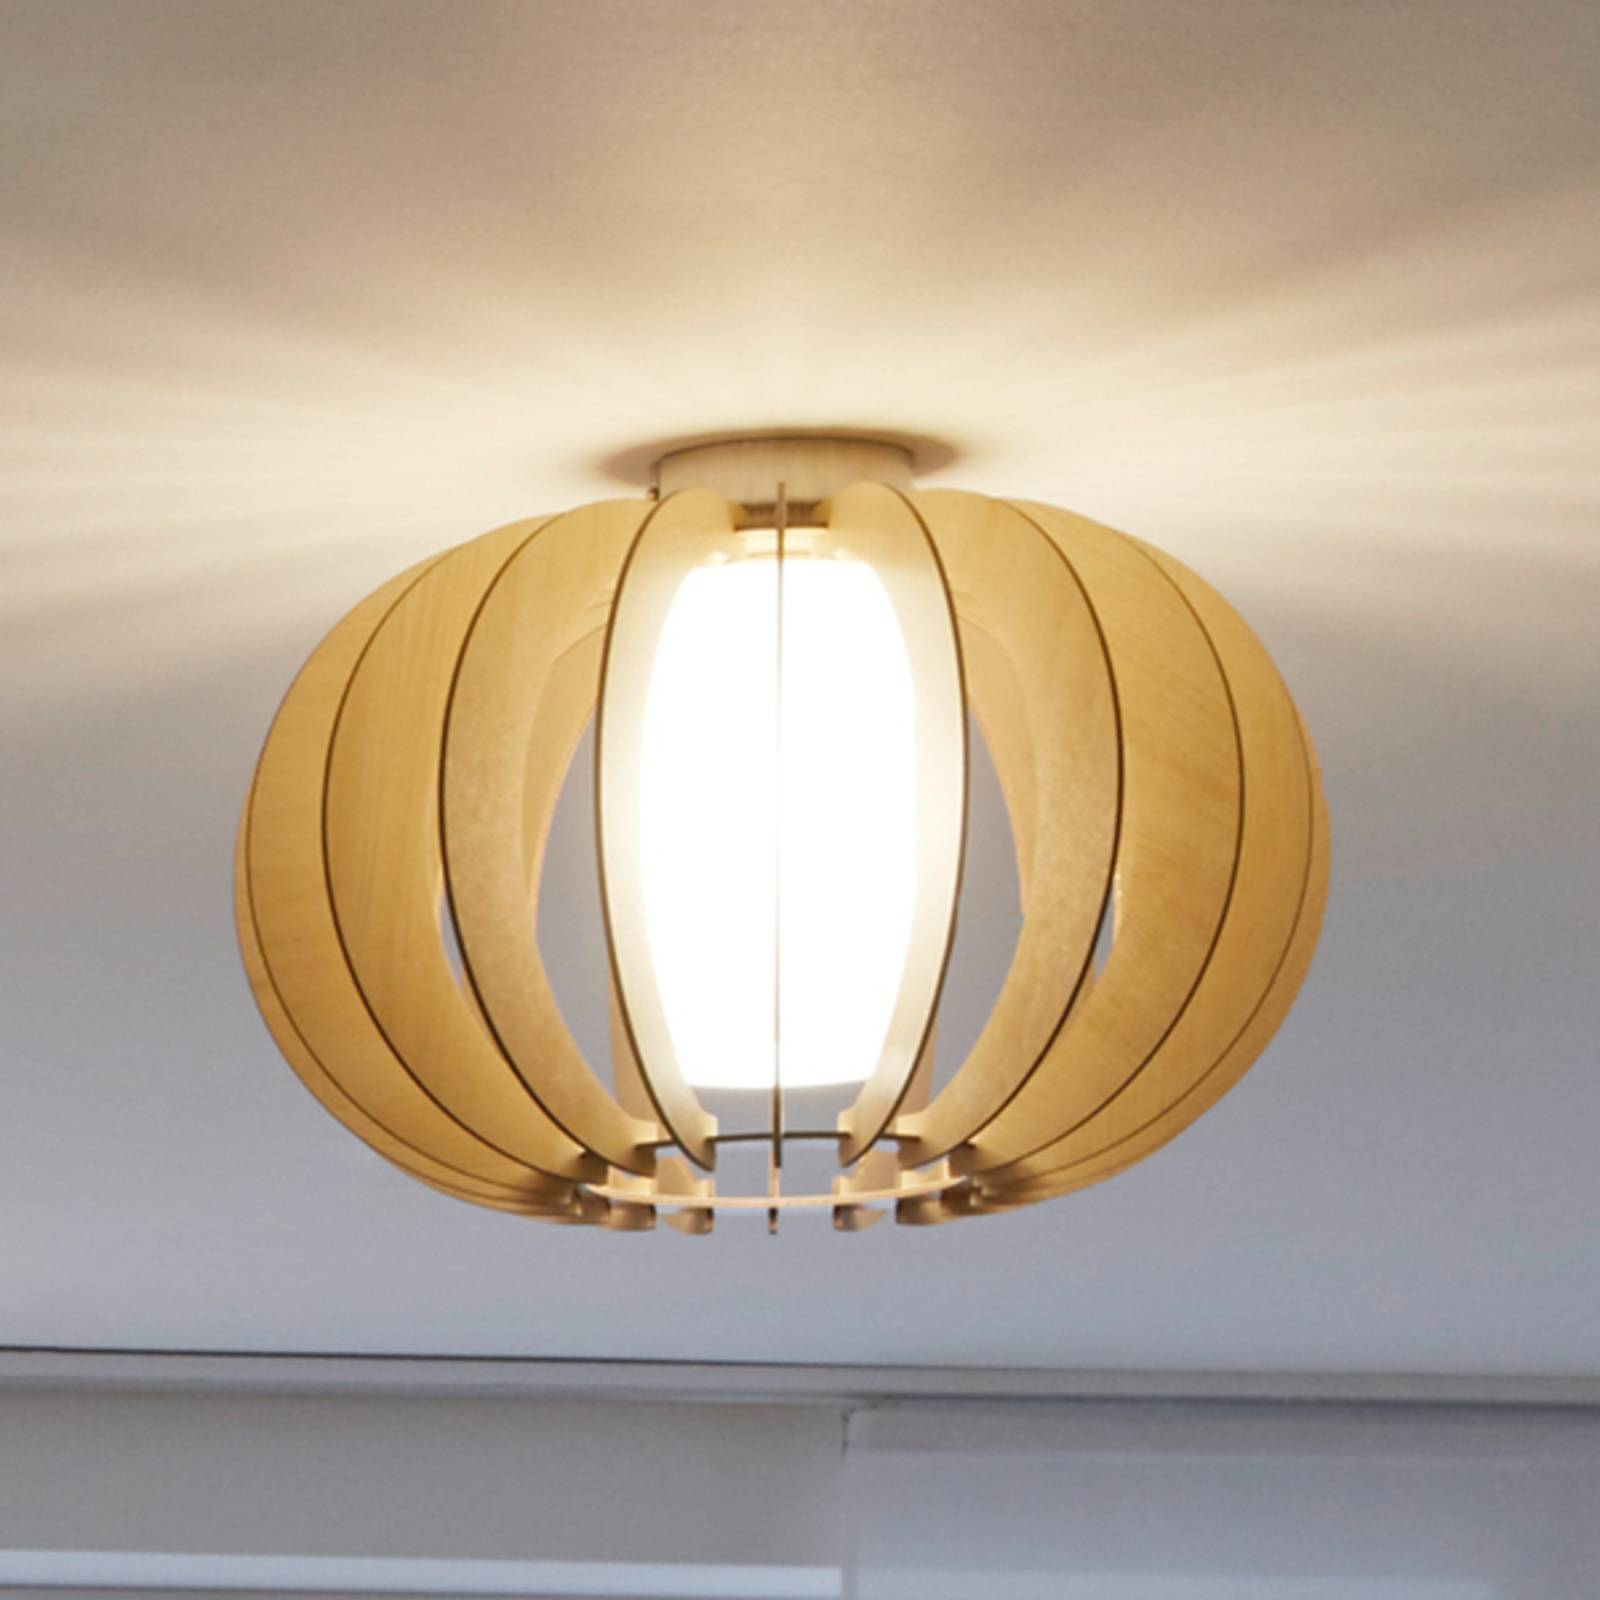 Photos - Chandelier / Lamp EGLO Natural-looking Stellato ceiling lamp 